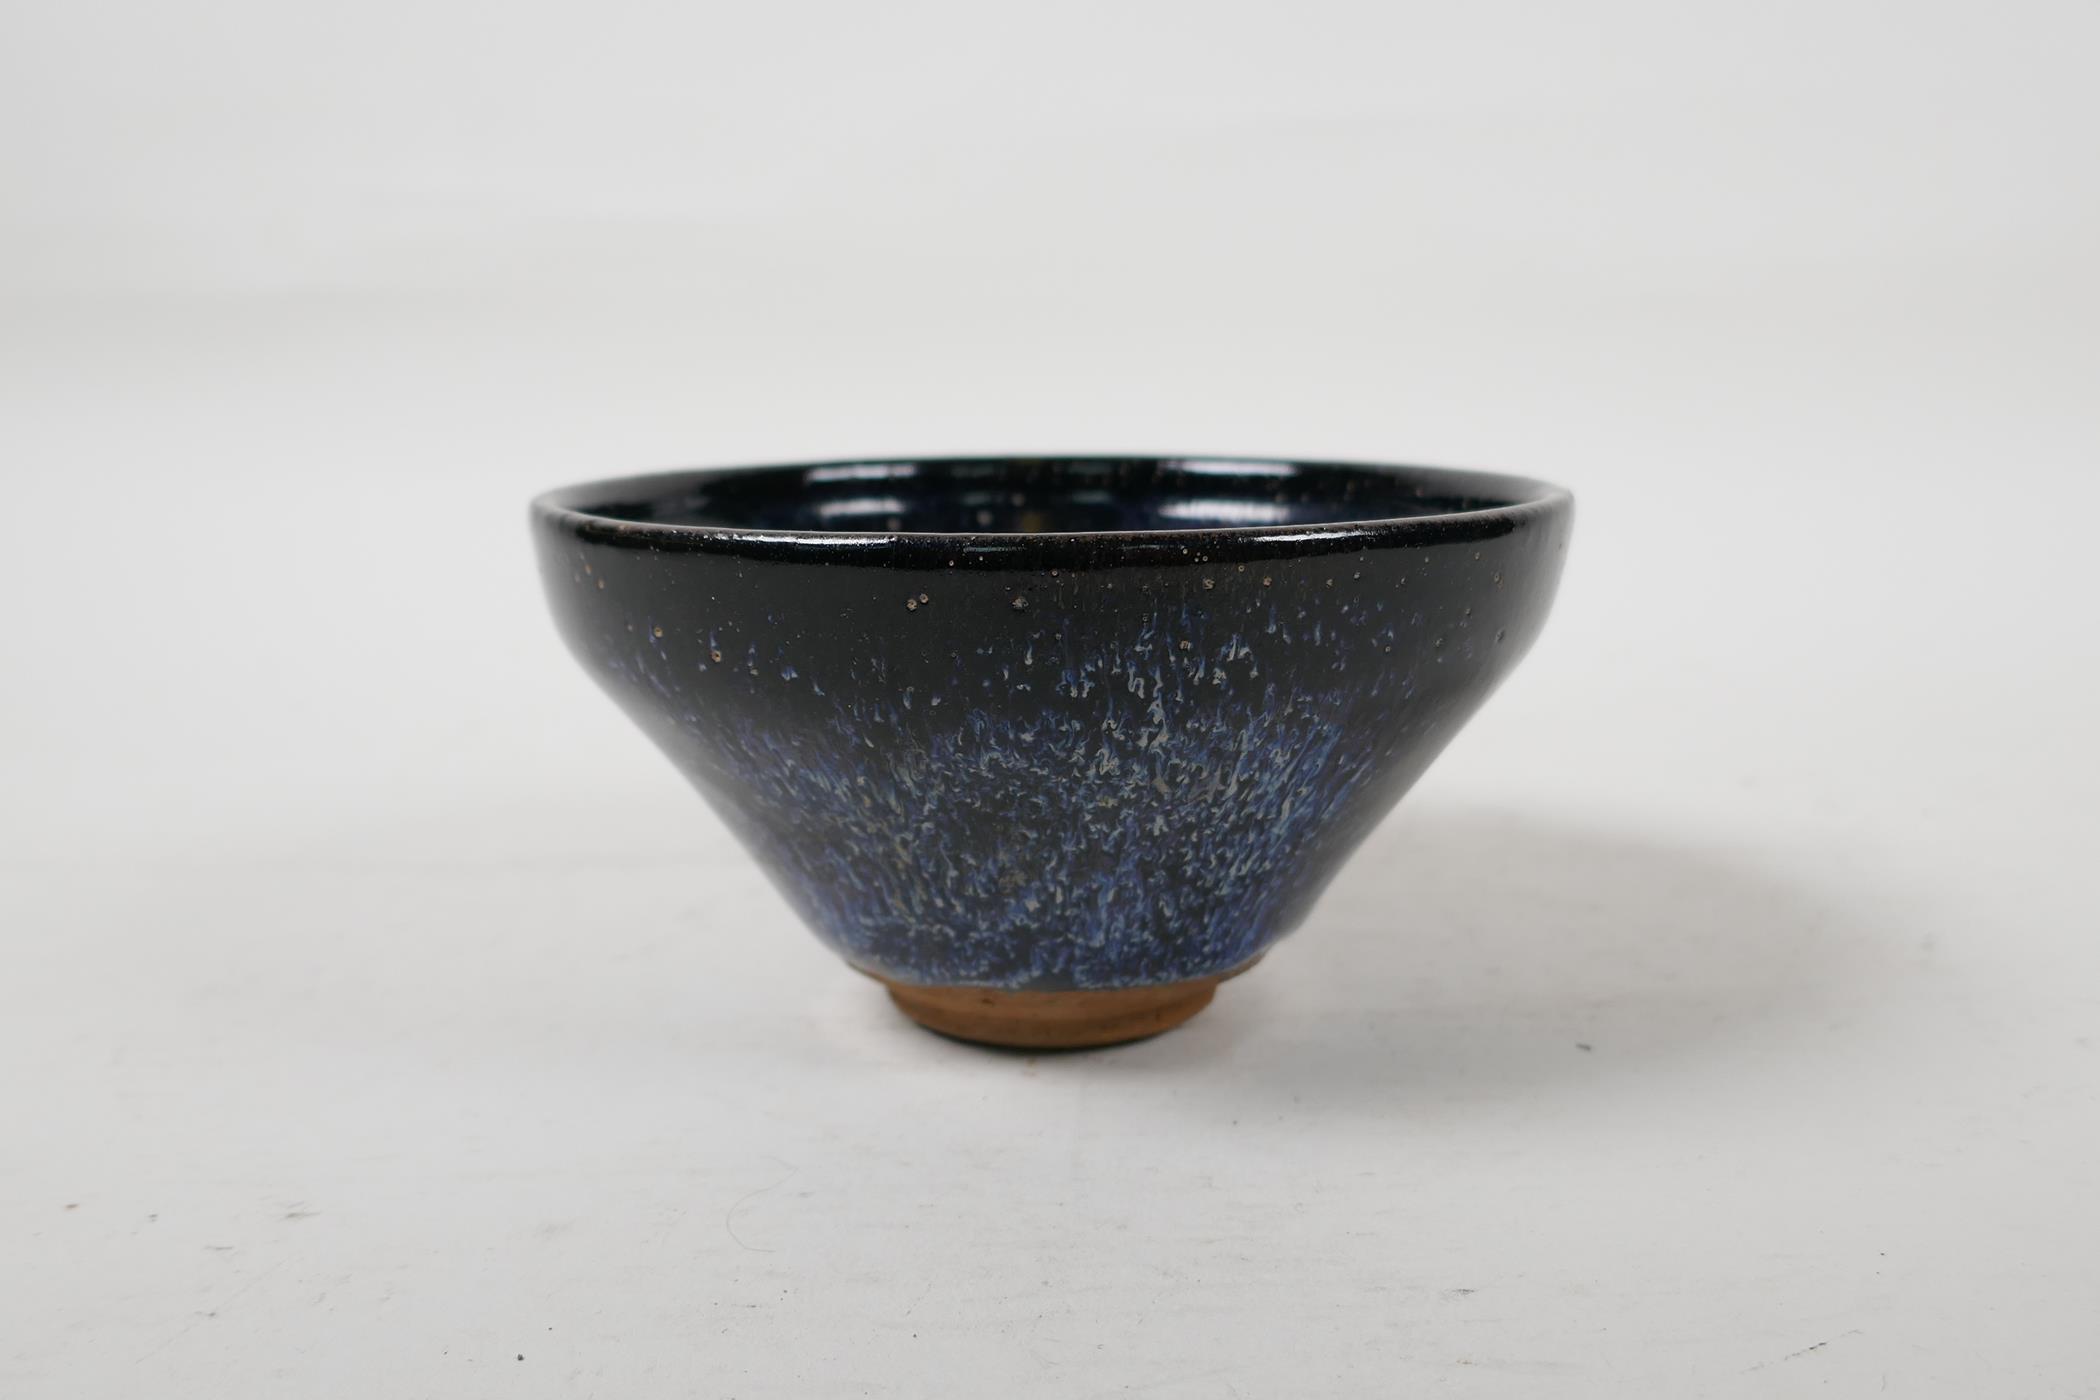 A Jian kiln pottery rice bowl with a black and blue glaze, Chinese, 5" diameter - Image 2 of 5